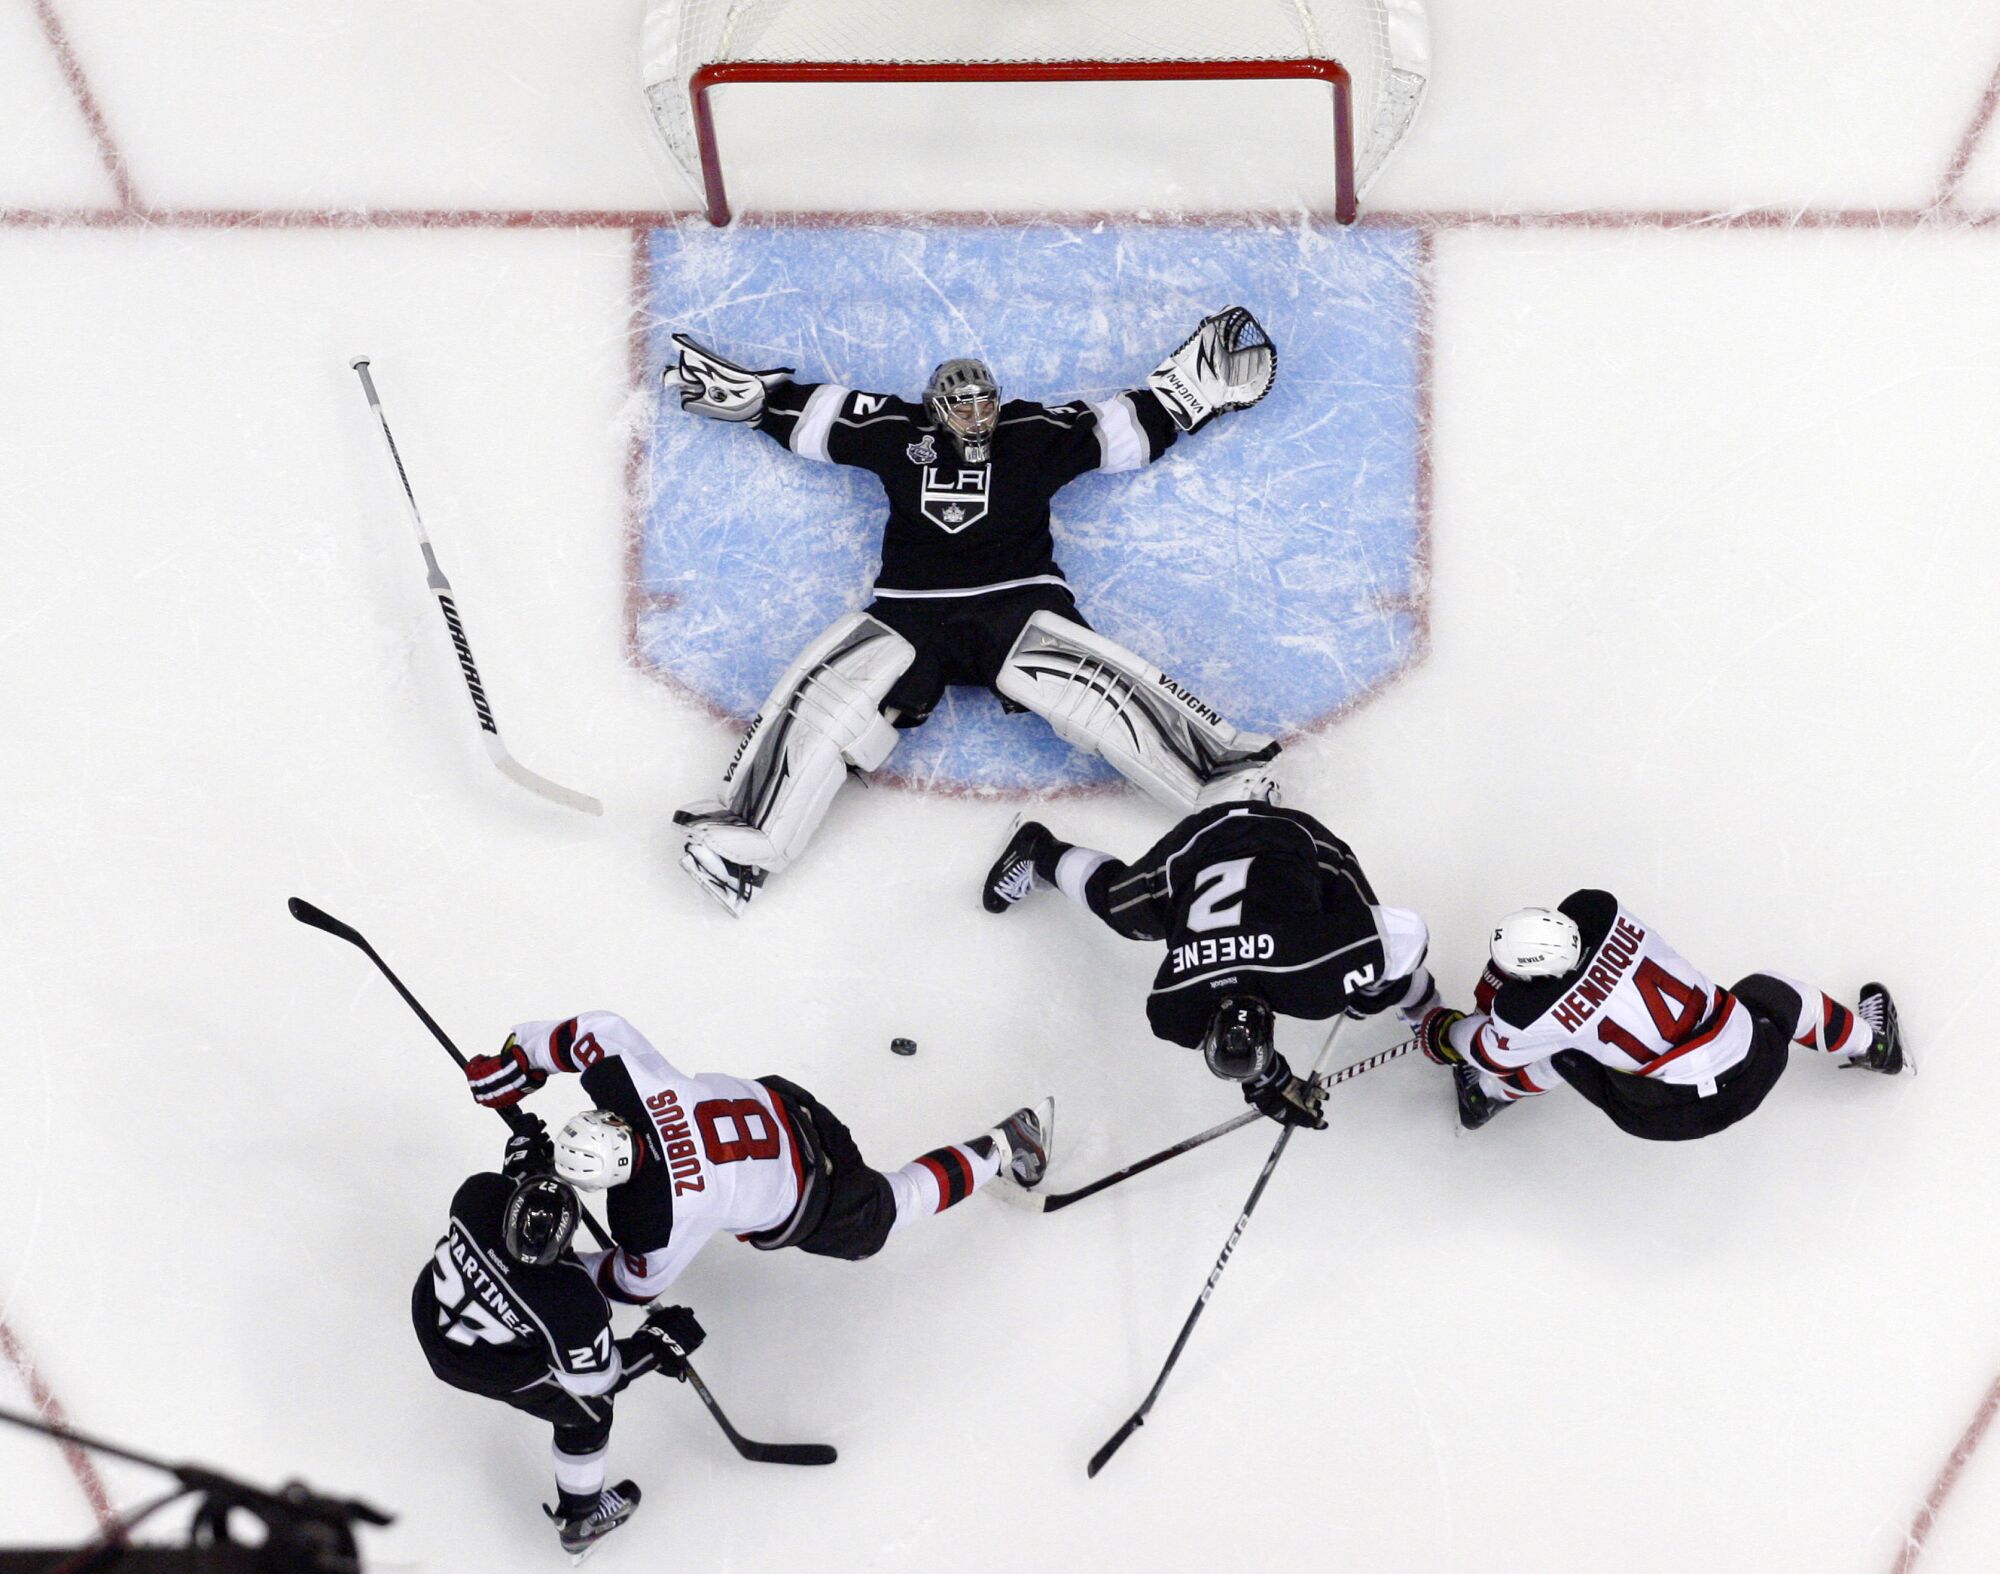 Kings goaltender Jonathan Quick tries to keep the puck in front of him during Game 4 of the 2012 Stanley Cup Finals.